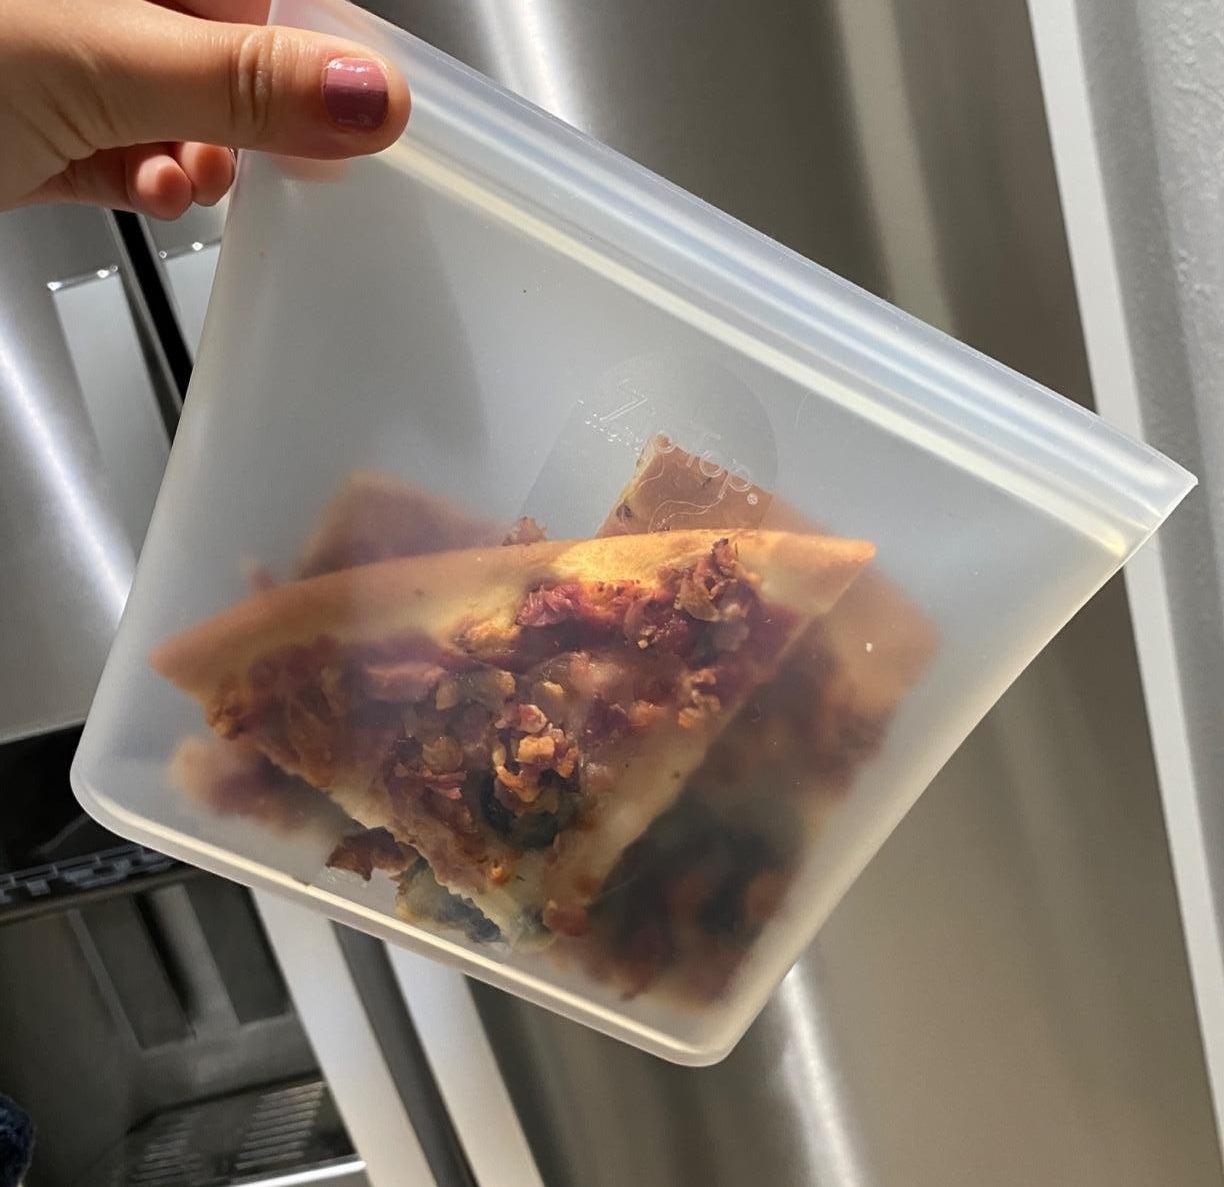 Reviewer holding the reusable bag with pizza slices in it